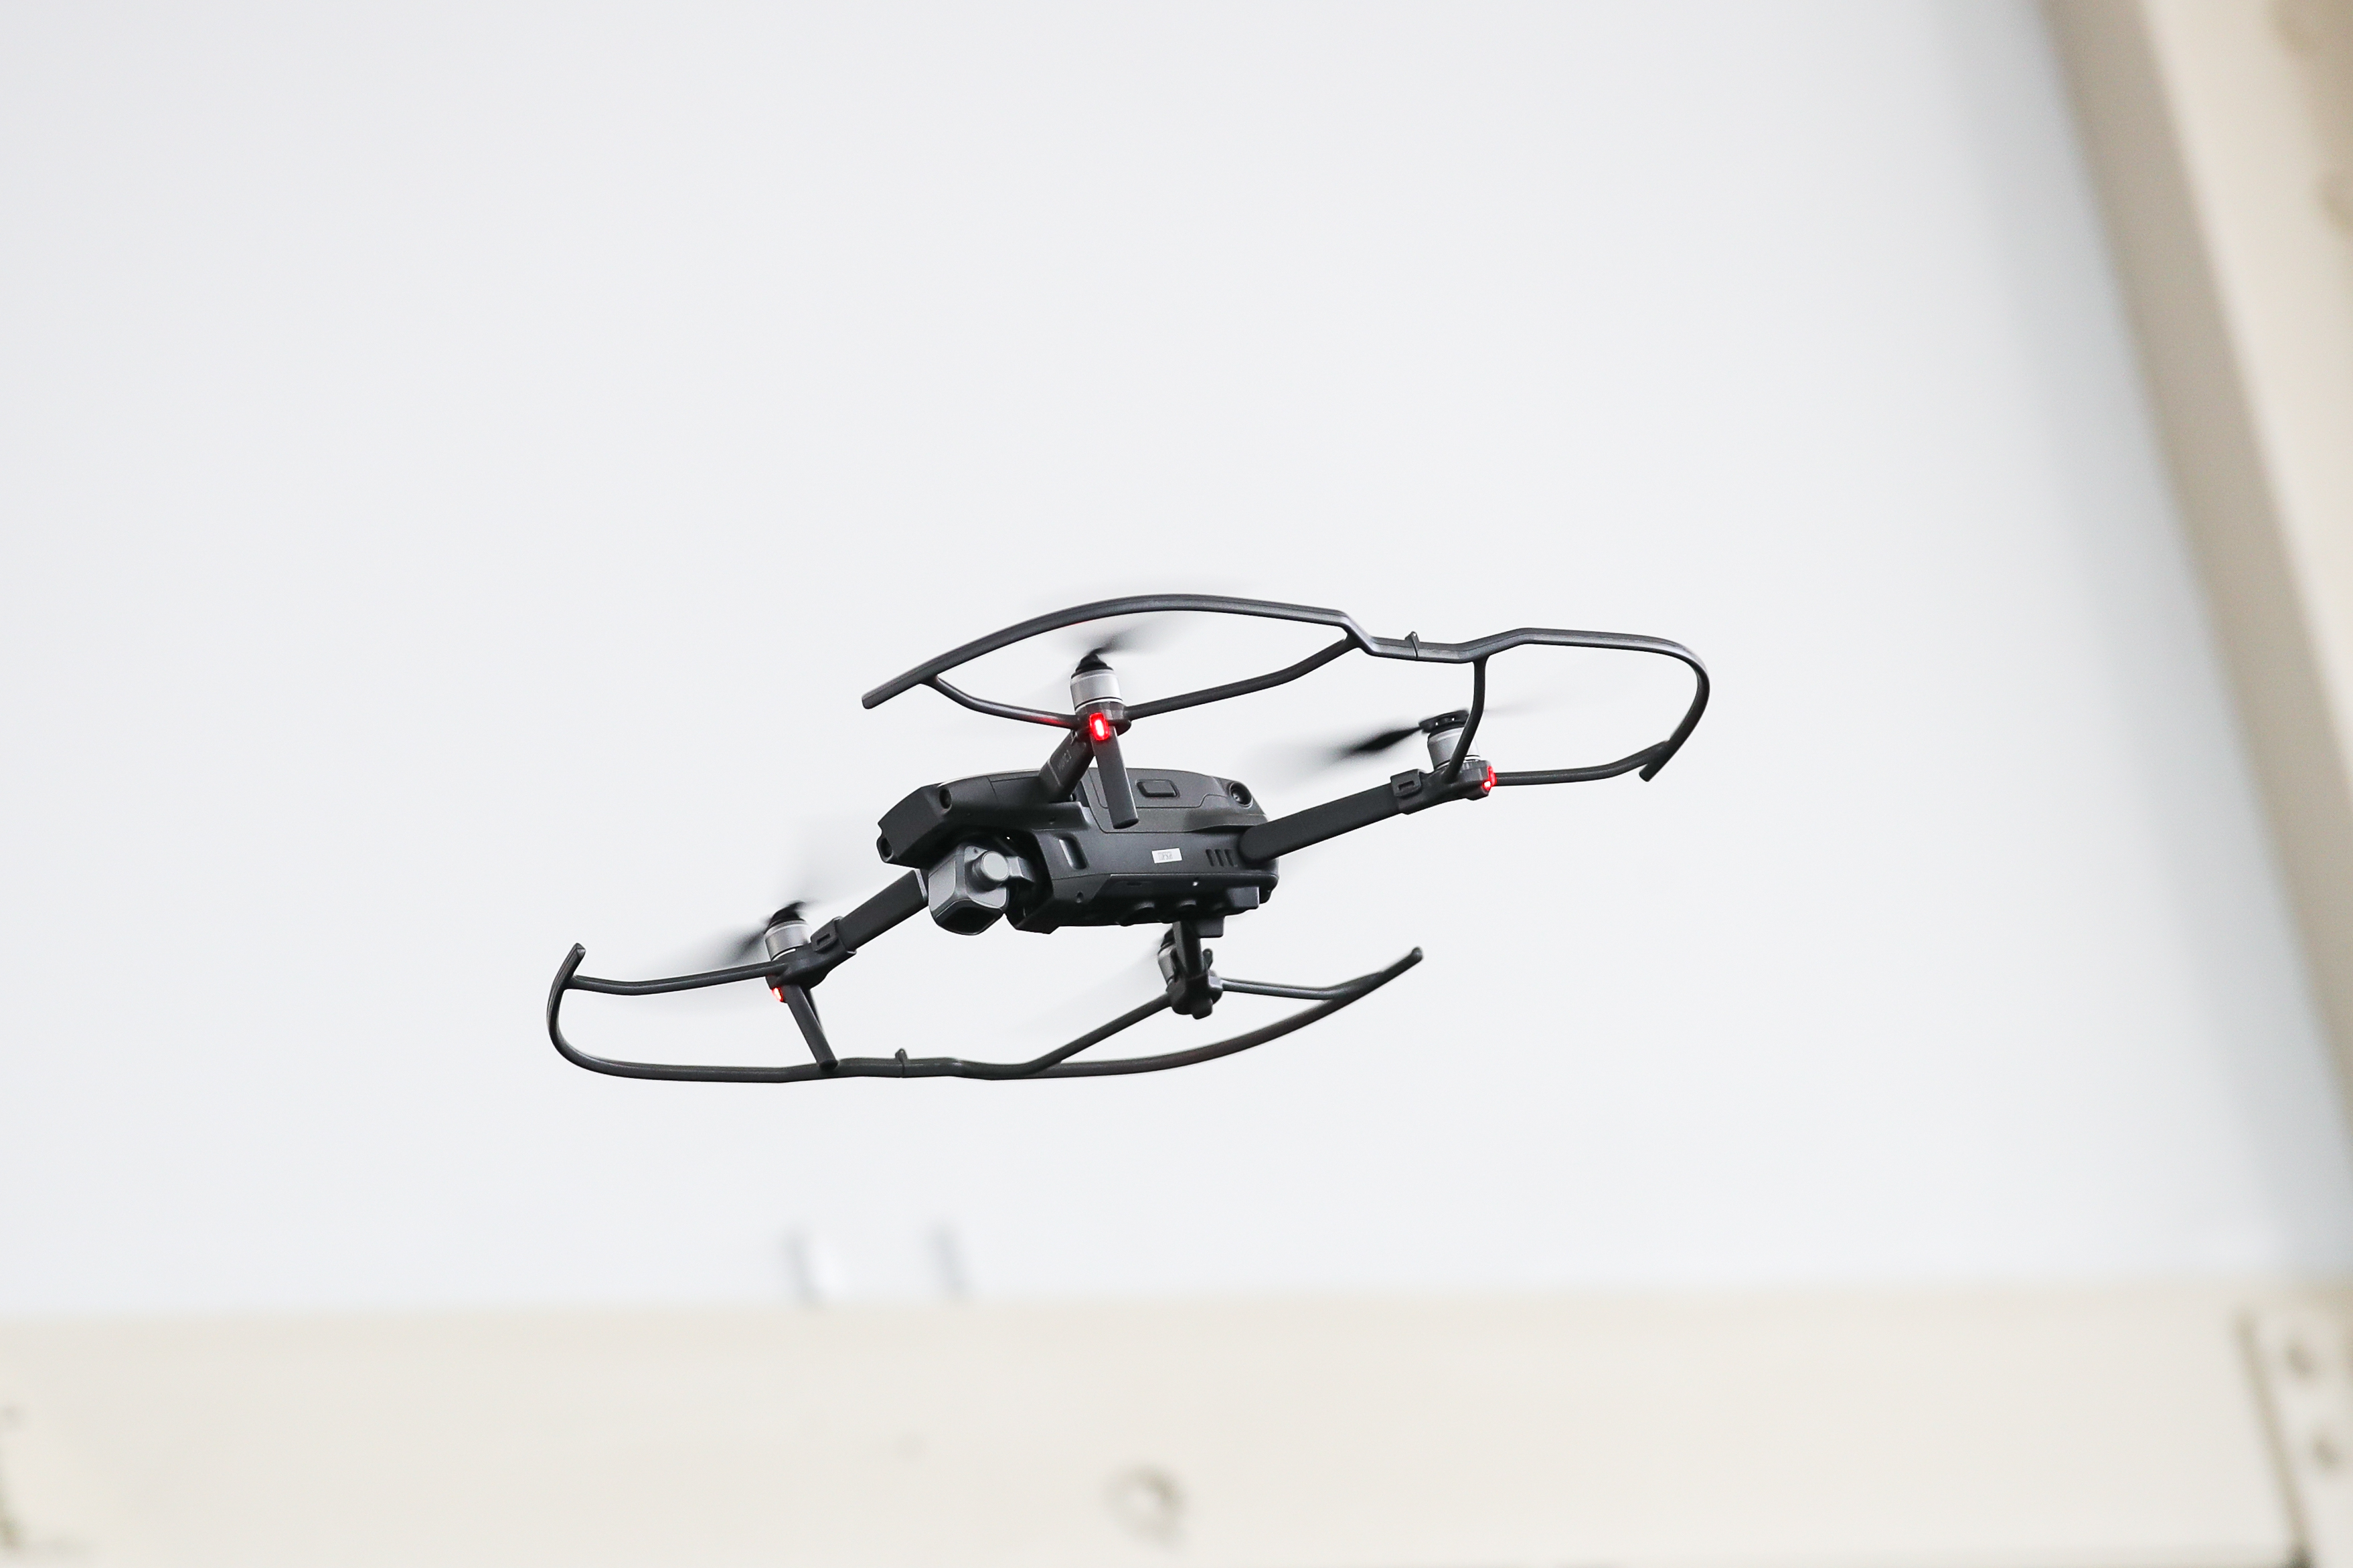 A new DJI Mavic Pro 2 drone flies during a product launch event at the Brooklyn Navy Yard, August 23, 2018 in New York City. Drew Angerer/Getty Images